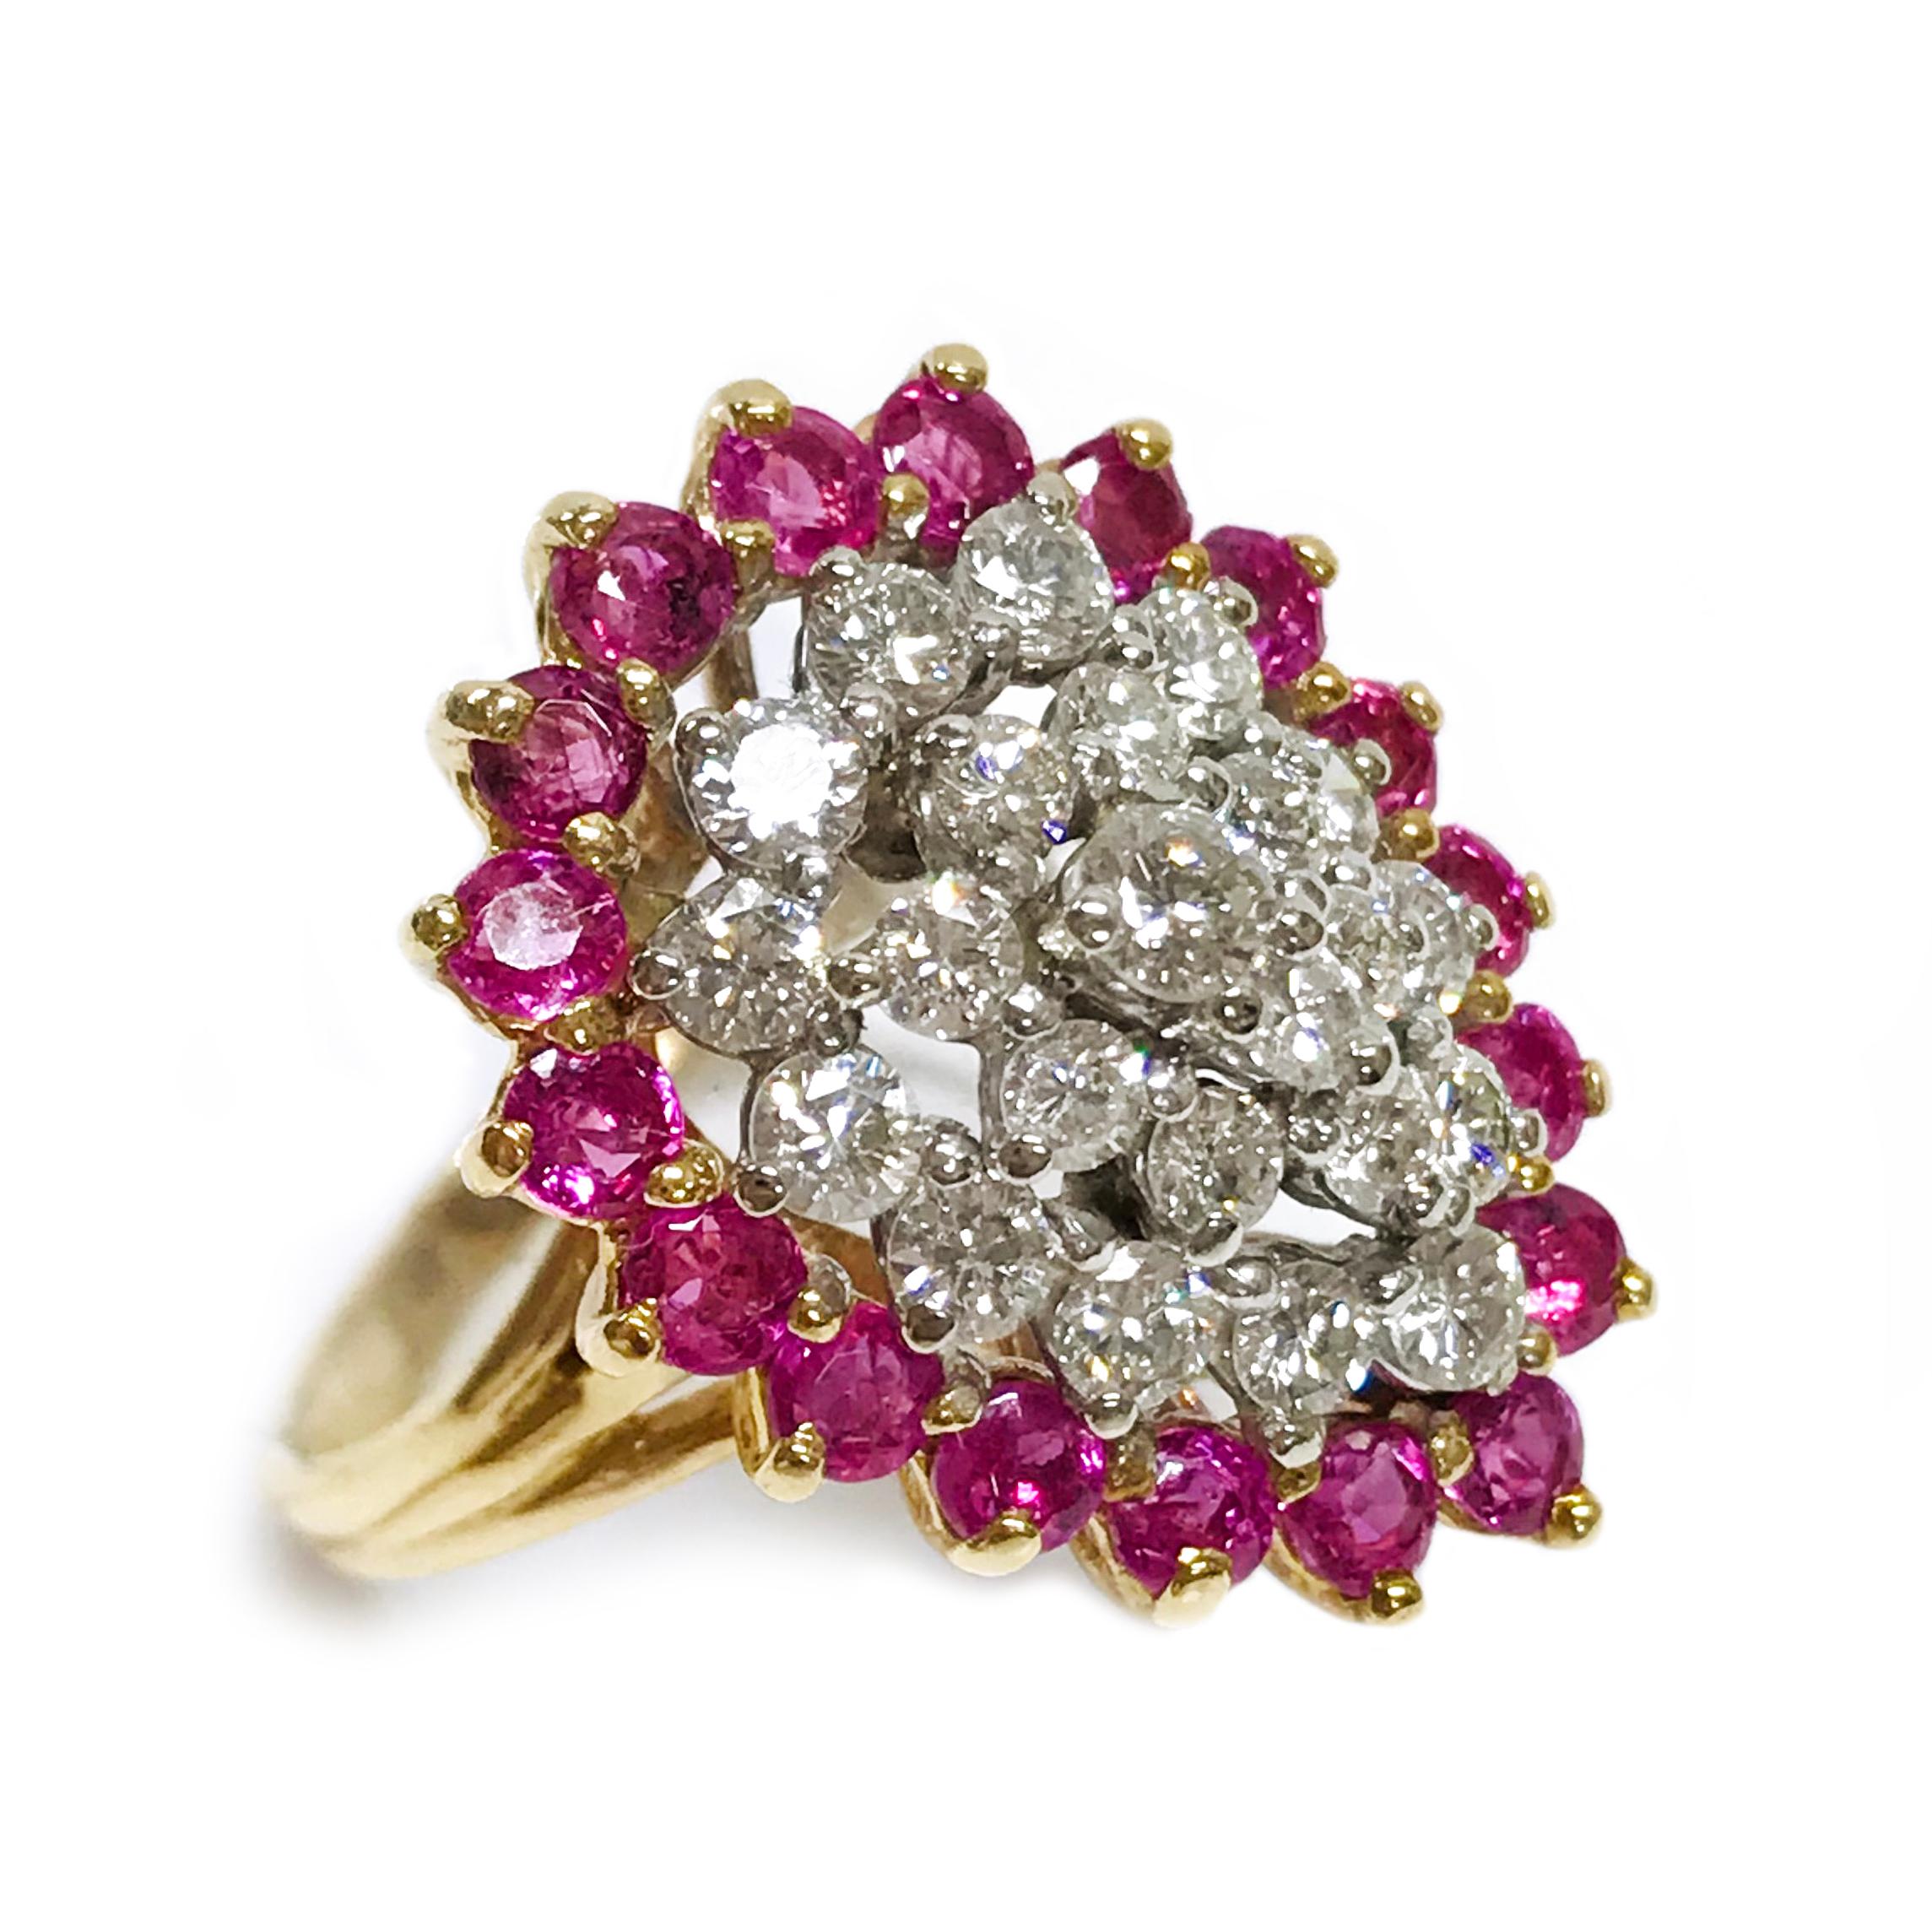 14 Karat Two-Tone Diamond Ruby Cluster Ring. The dazzling split band ring features twenty-three round diamonds and eighteen round medium red rubies all prong set. The raised gallery highlights the pear-shaped formation of the stones. The diamonds